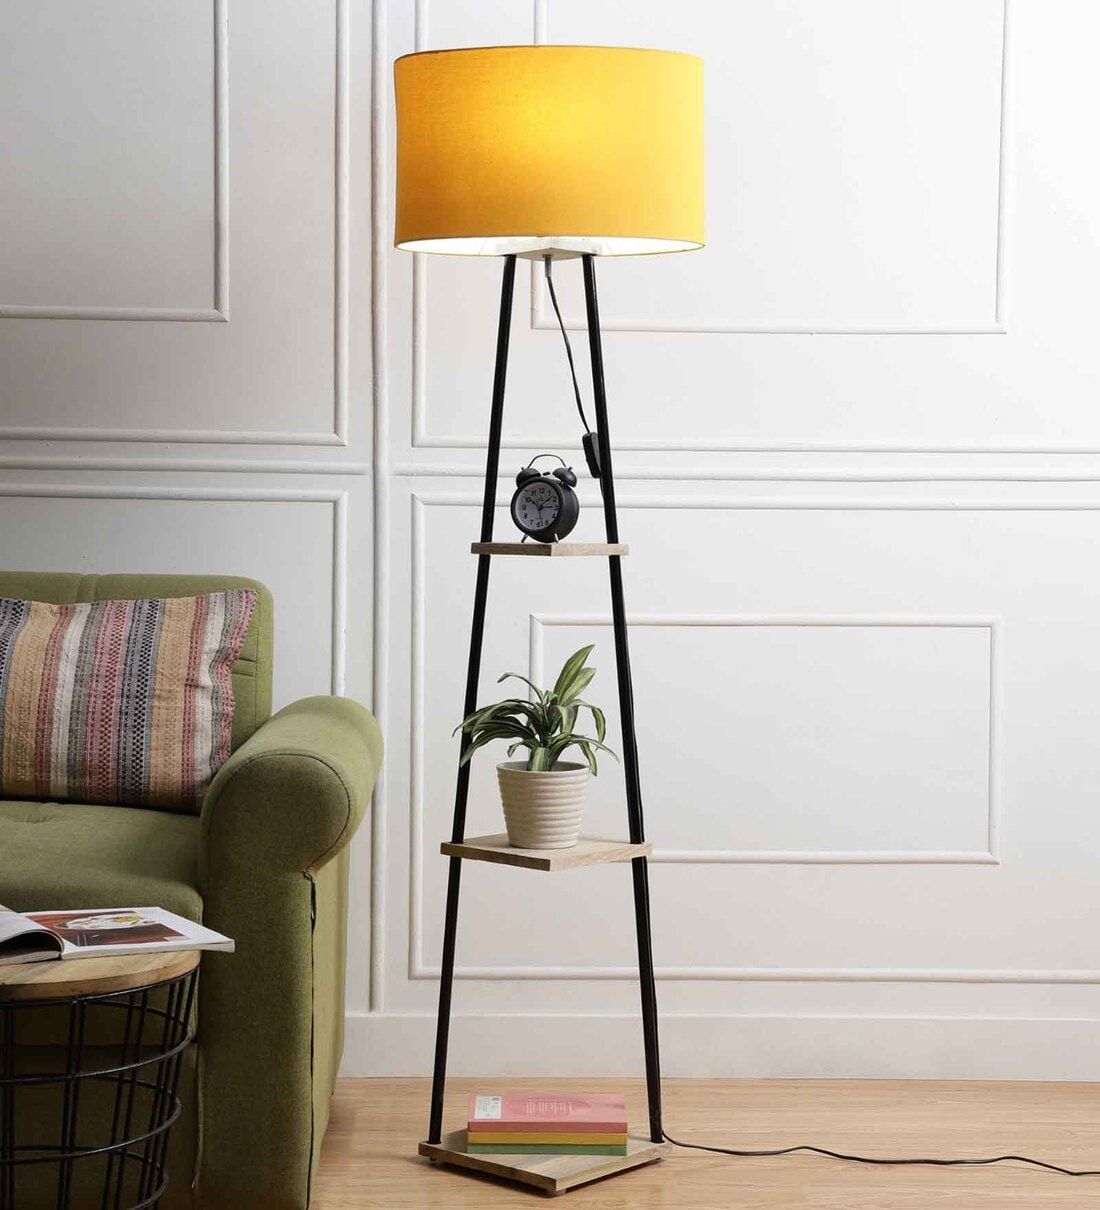 Buy Yellow Midwest Fabric Shade 3 Tier Shelf Storage Floor Lamp With Metal  Basesanded Edge Online – Shelf Floor Lamps – Lamps – Lamps And Lighting  – Pepperfry Product In 3 Tier Floor Lamps (Photo 3 of 15)